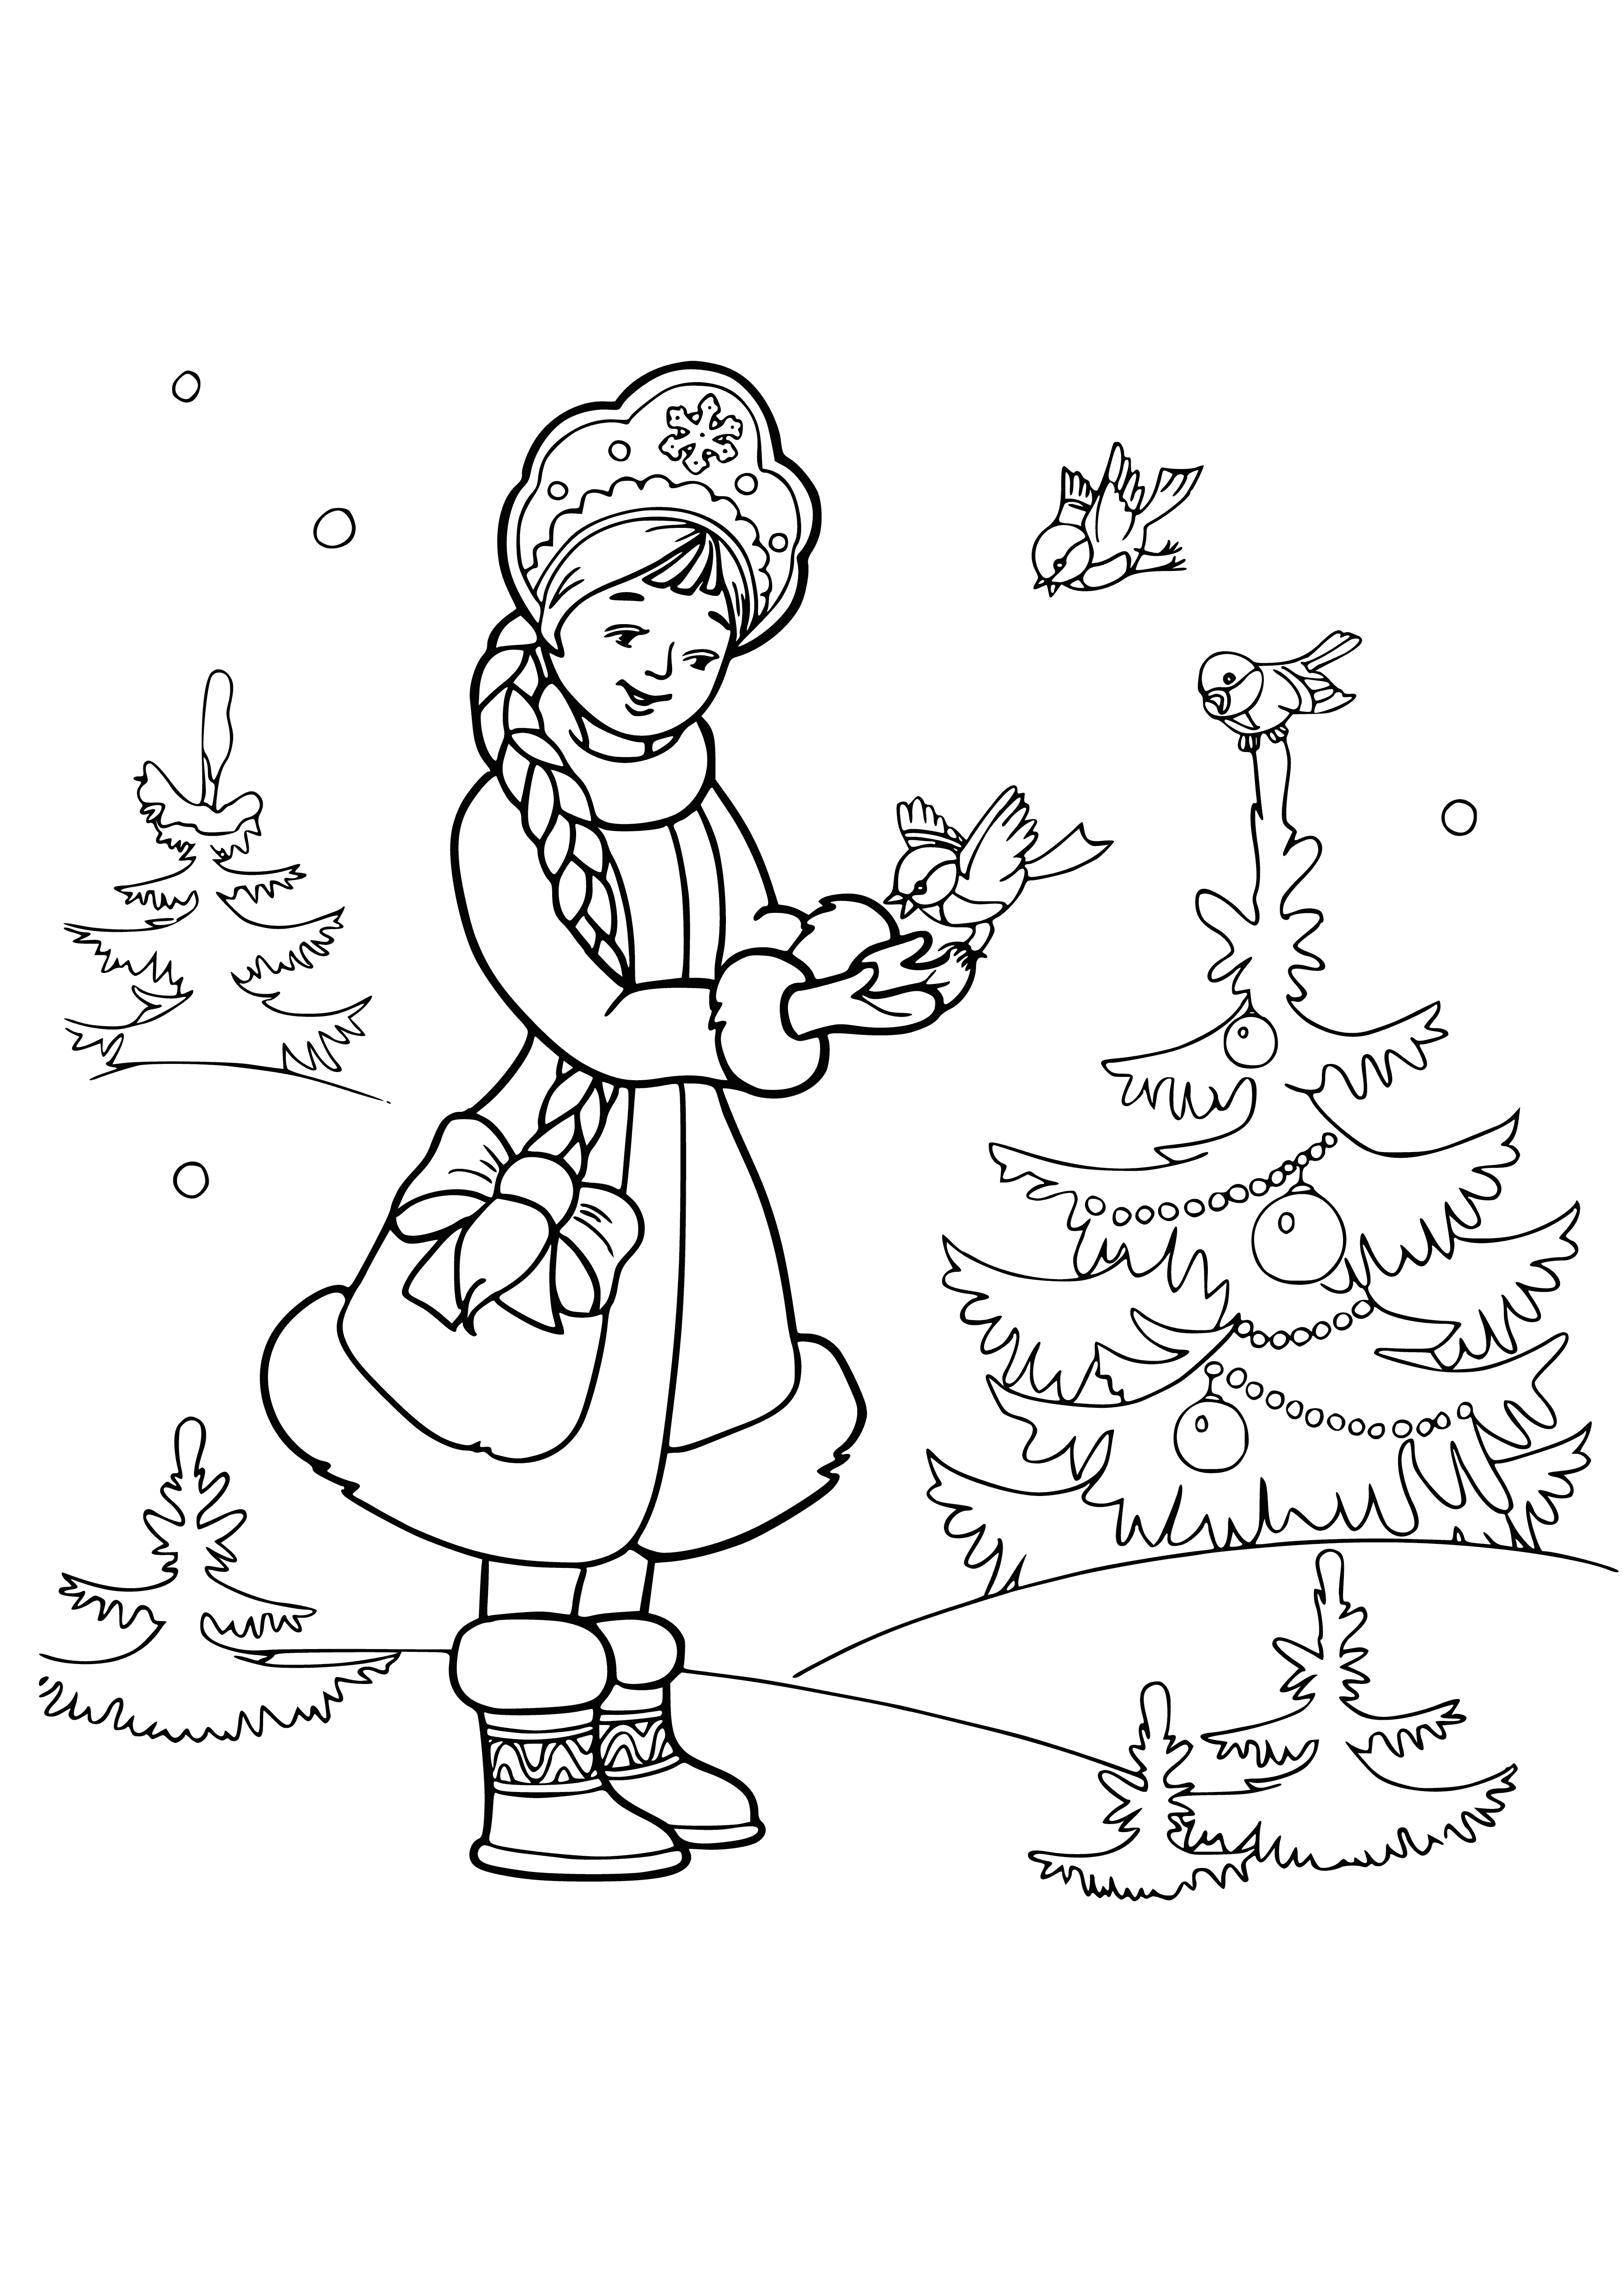 coloring page: A little girl stands in a snowy forest in a white dress & red scarf, holding a basket of berries.